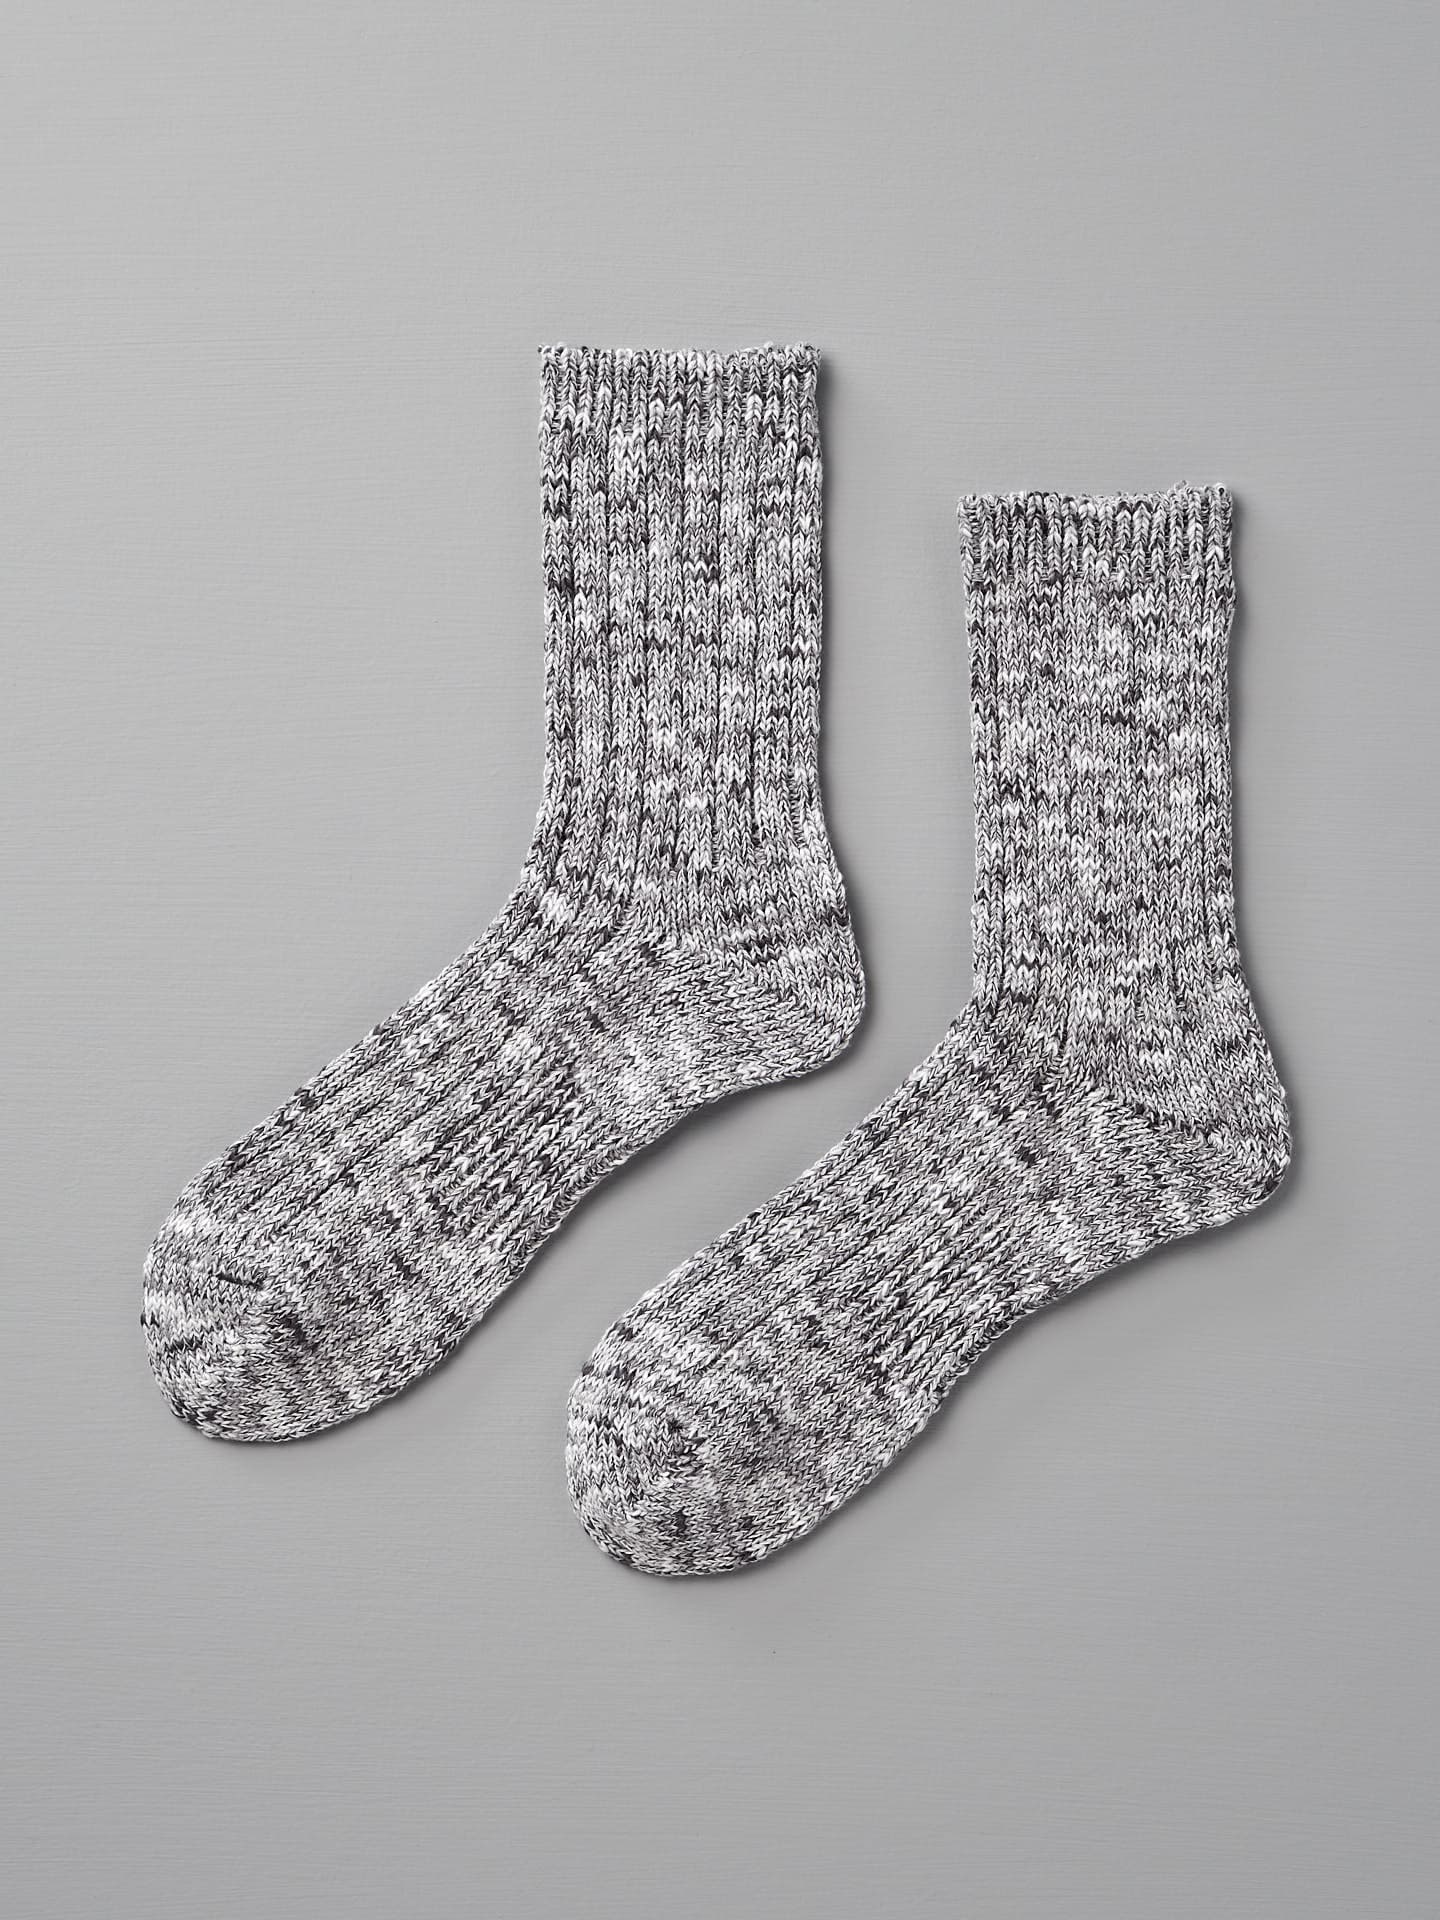 A pair of Mauna Kea Japanese Slub Rib Socks – Grey with a ribbed texture and slight marling, laid flat against a gray background, designed to fit sizes EUR 39-42.